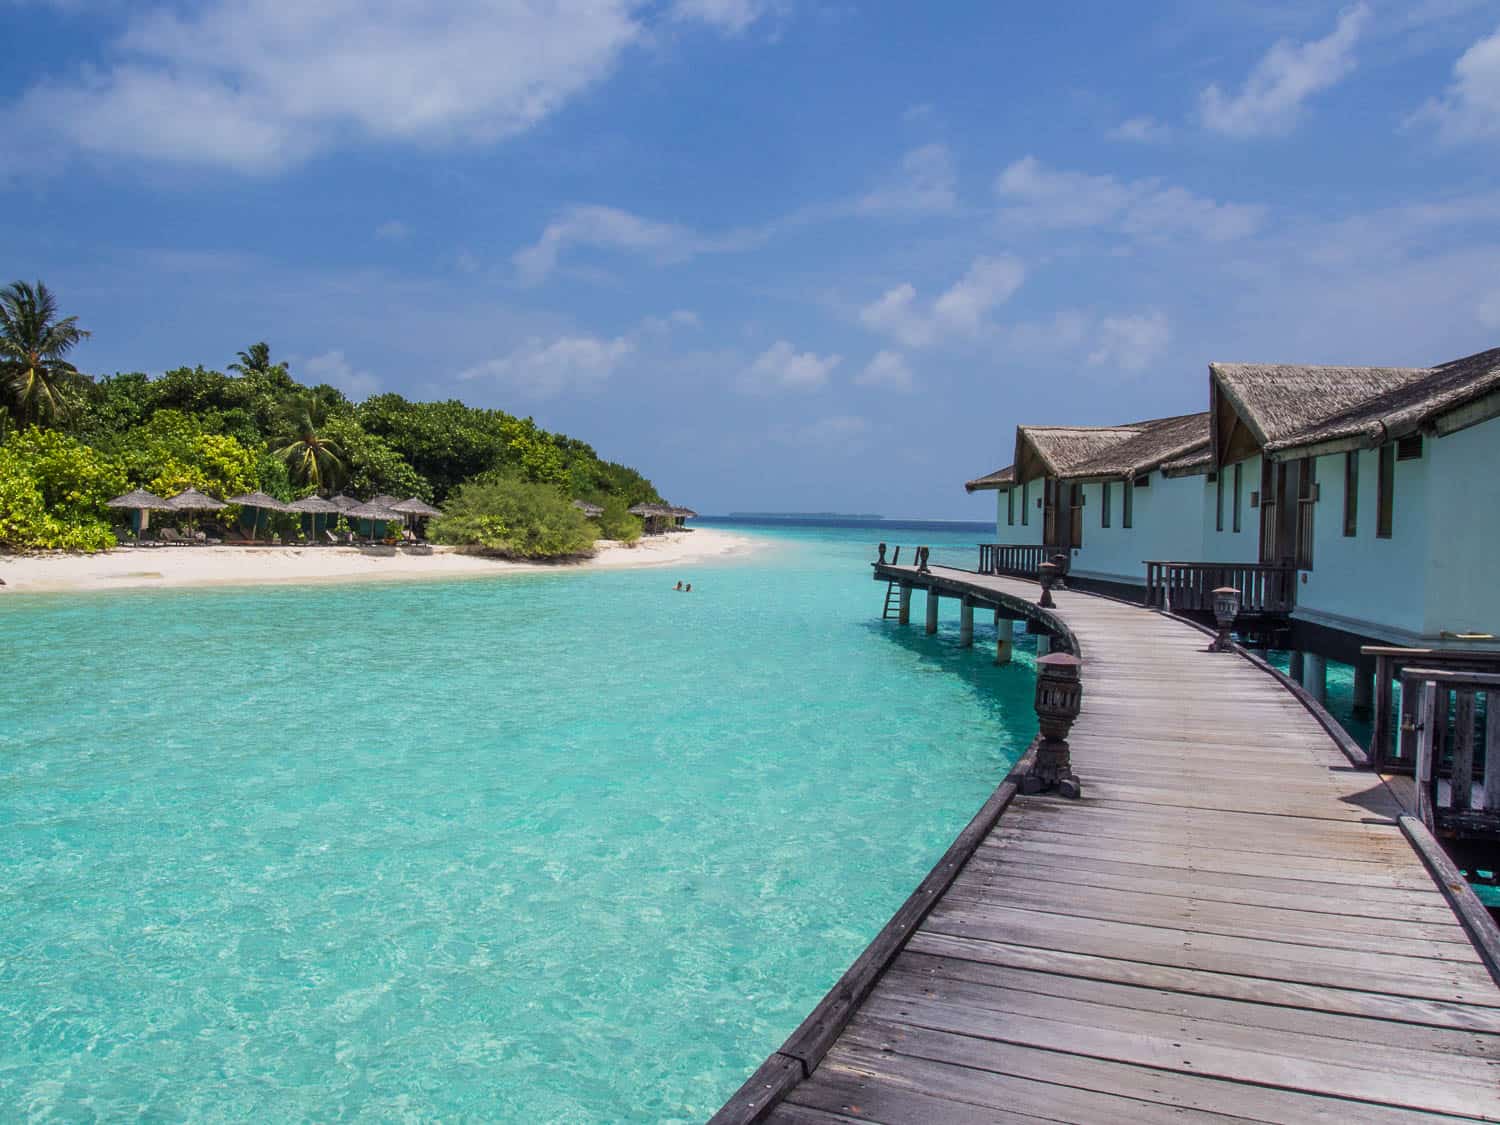 Affordable overwater bungalows in the Maldives at Reethi Beach Resort